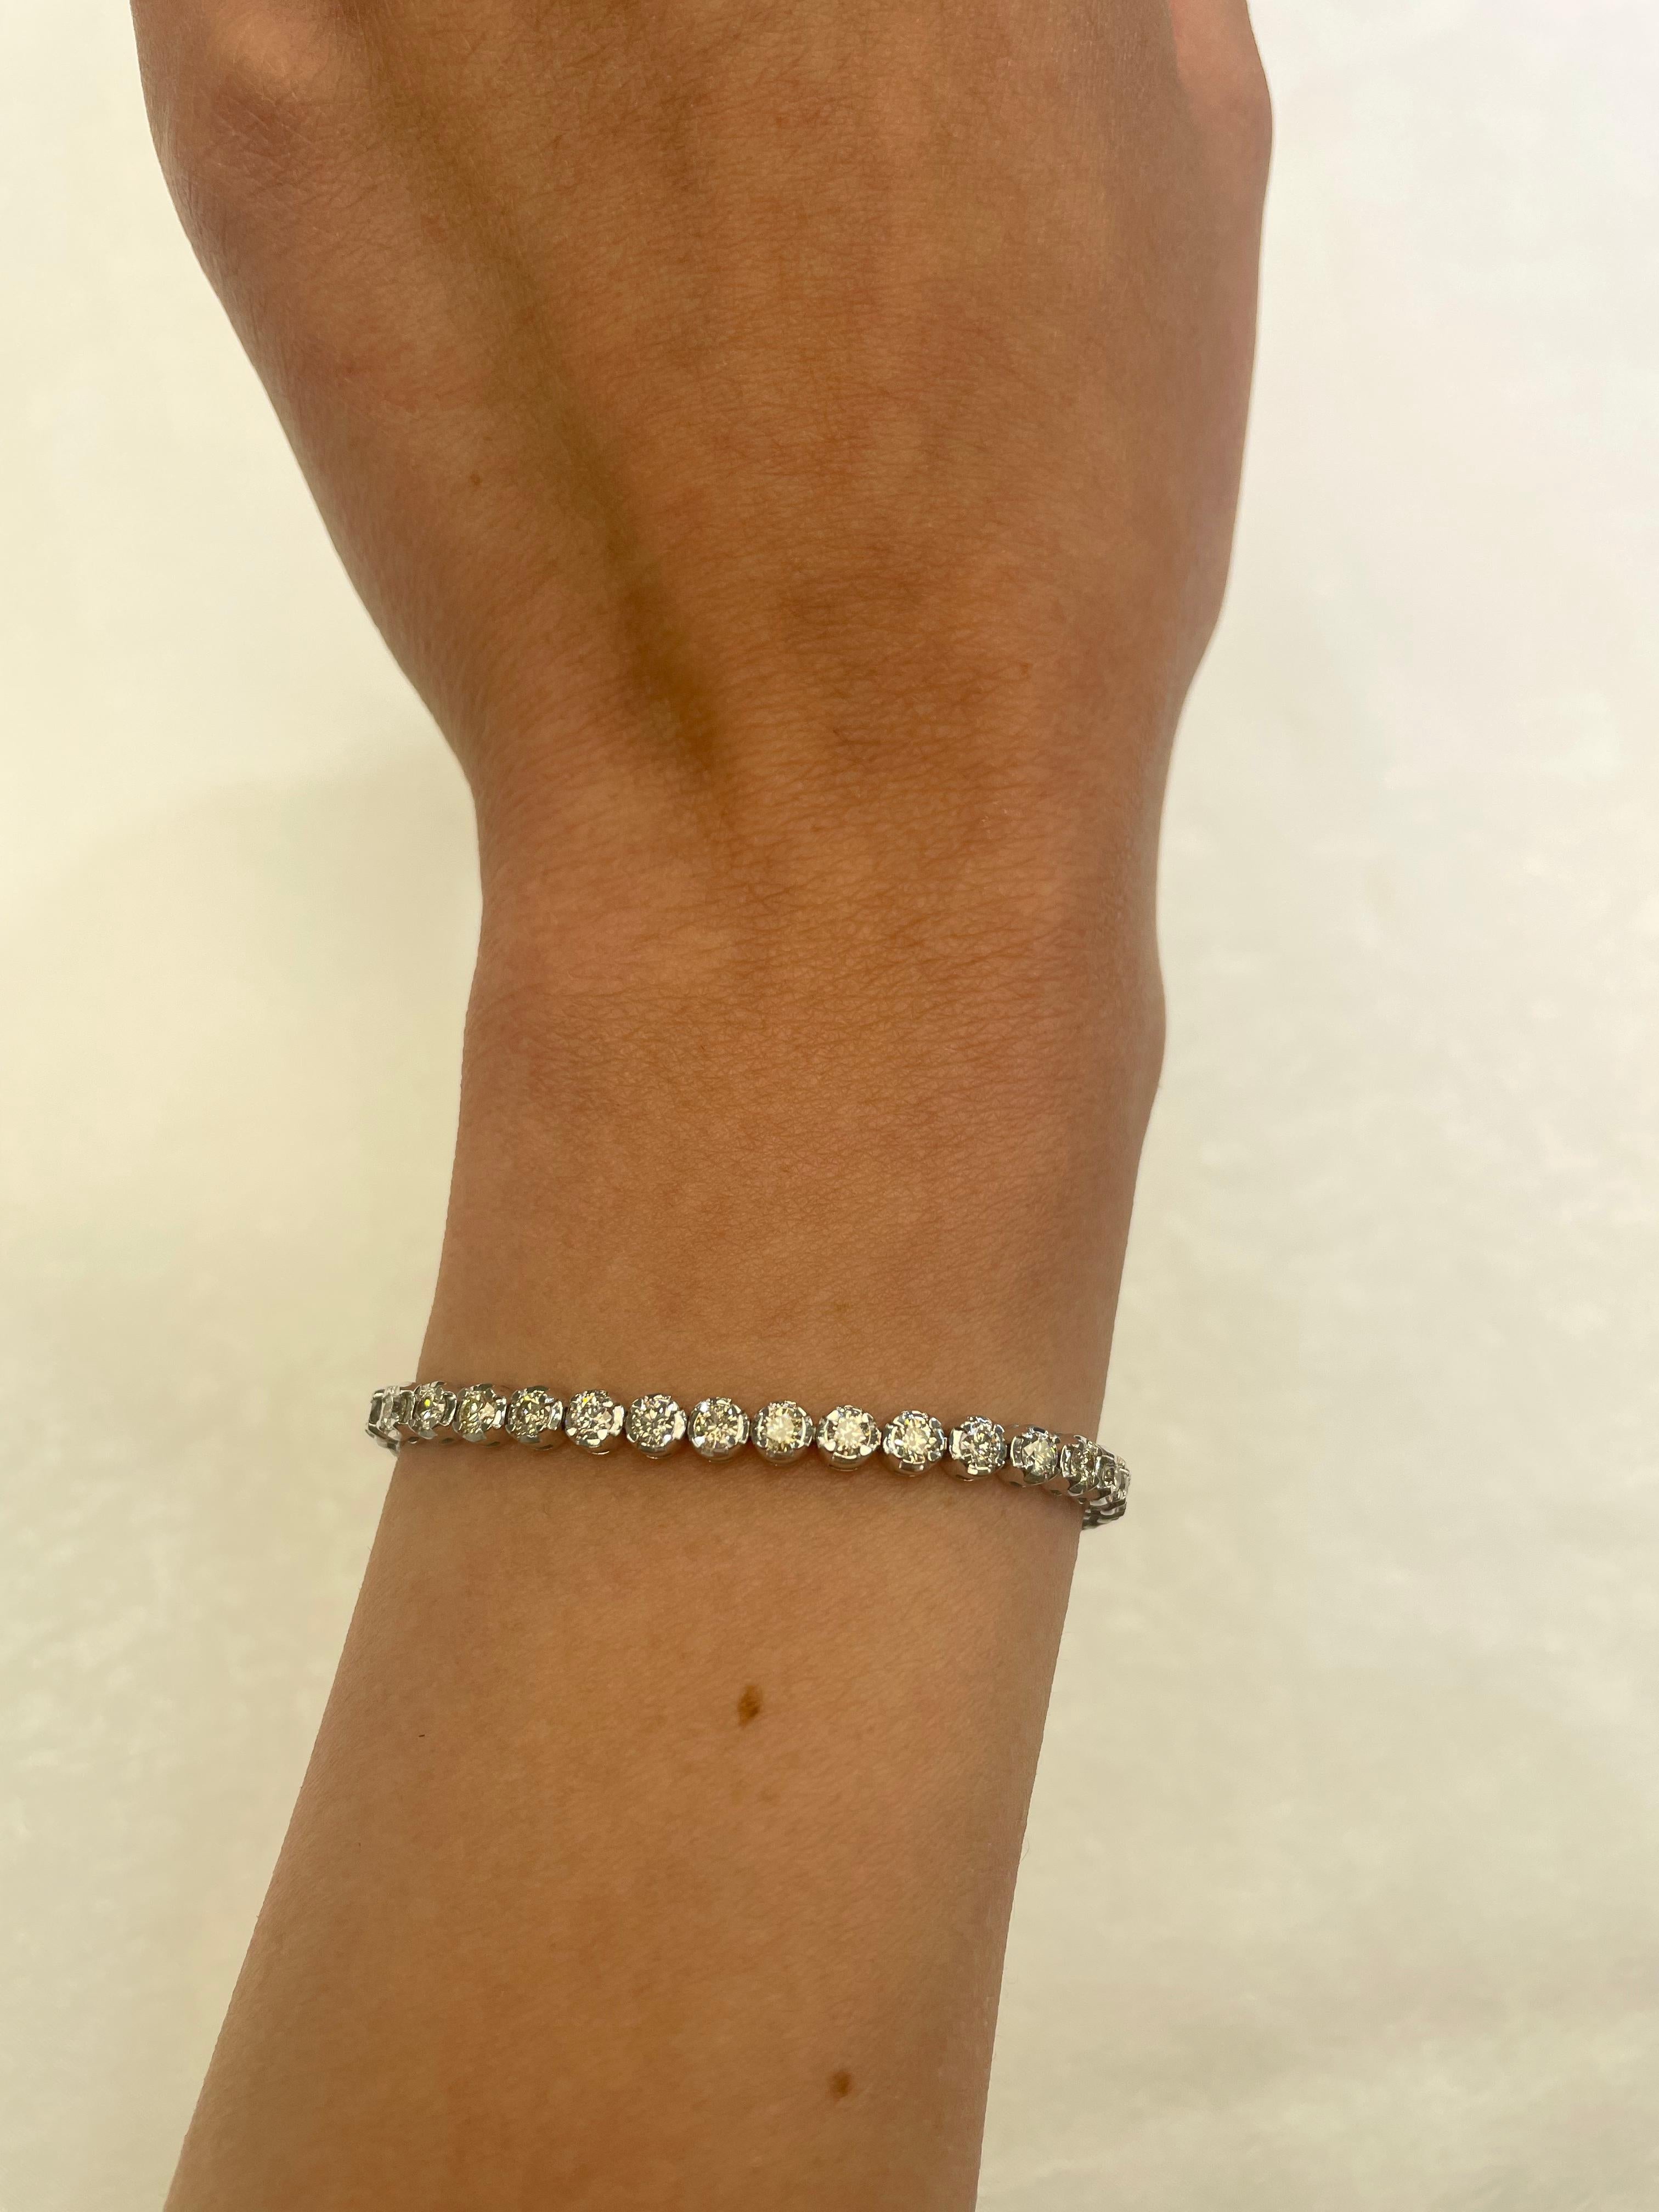 Exquisite and timeless diamonds tennis bracelet, by Alexander Beverly Hills.
46 round brilliant diamonds, 3.35 carats total. Approximately I/J color and SI clarity. Four prong set in 14k white gold, 10.49 grams, 7 inches. 
Accommodated with an